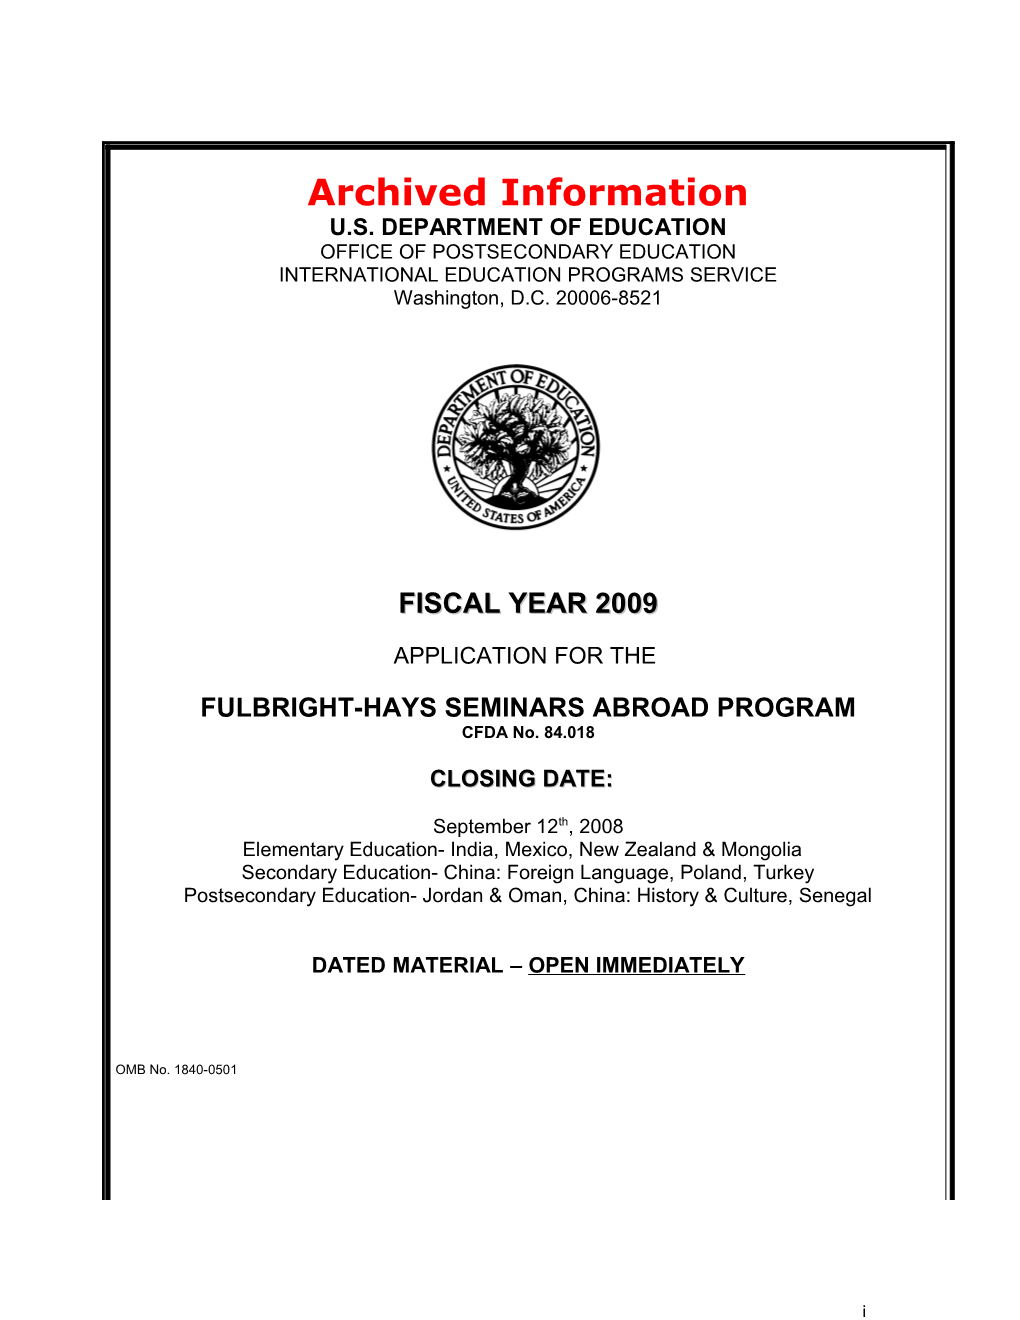 Archived: FY 09 Application for the Fulbright-Hays Seminars Abroad Program (MS Word)